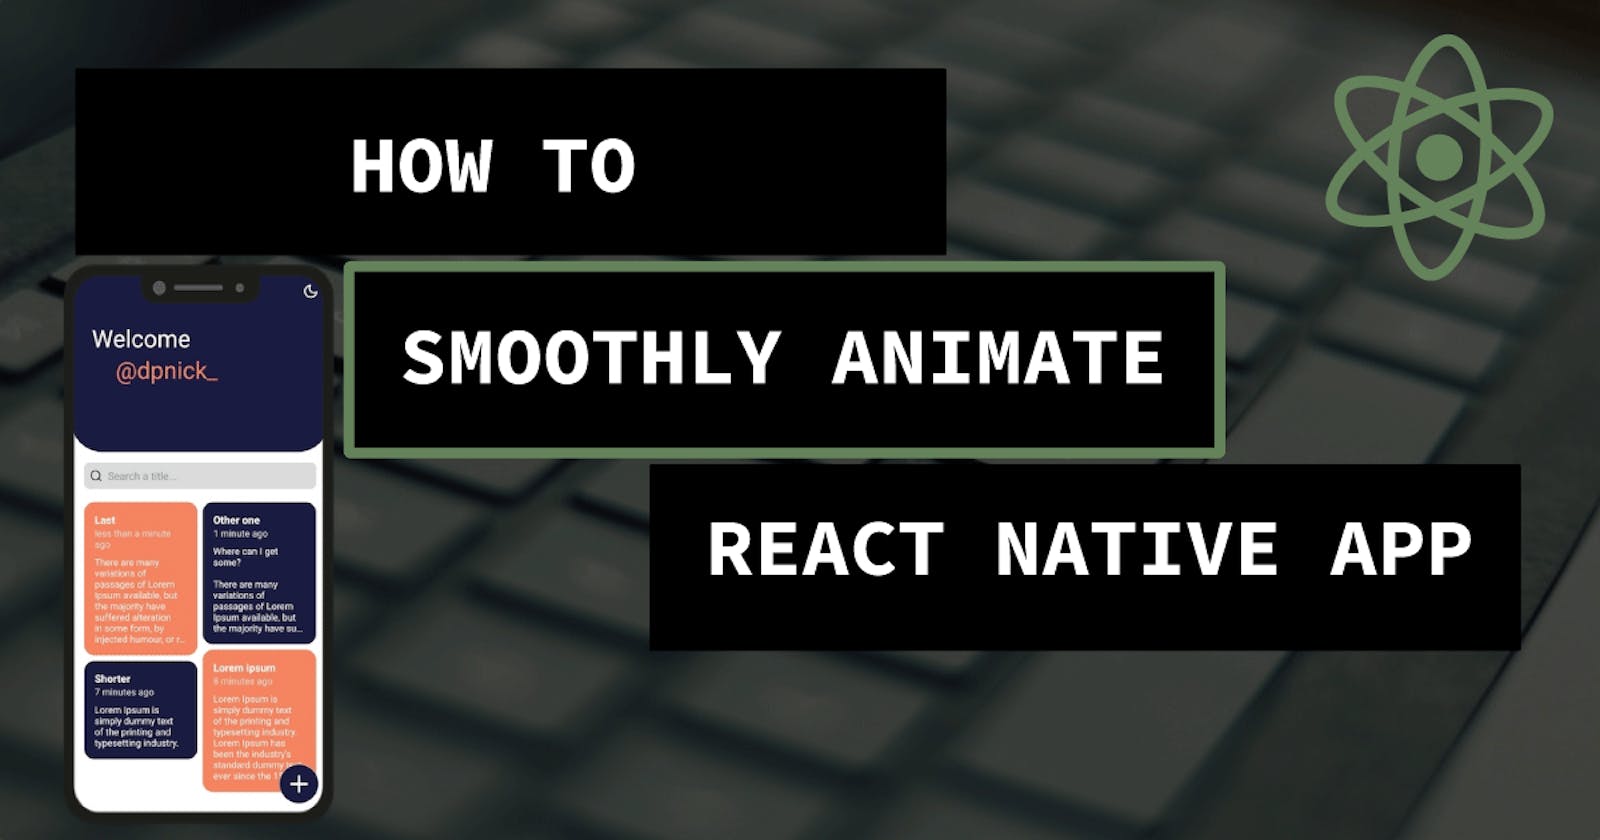 How to smoothly animate your react native app